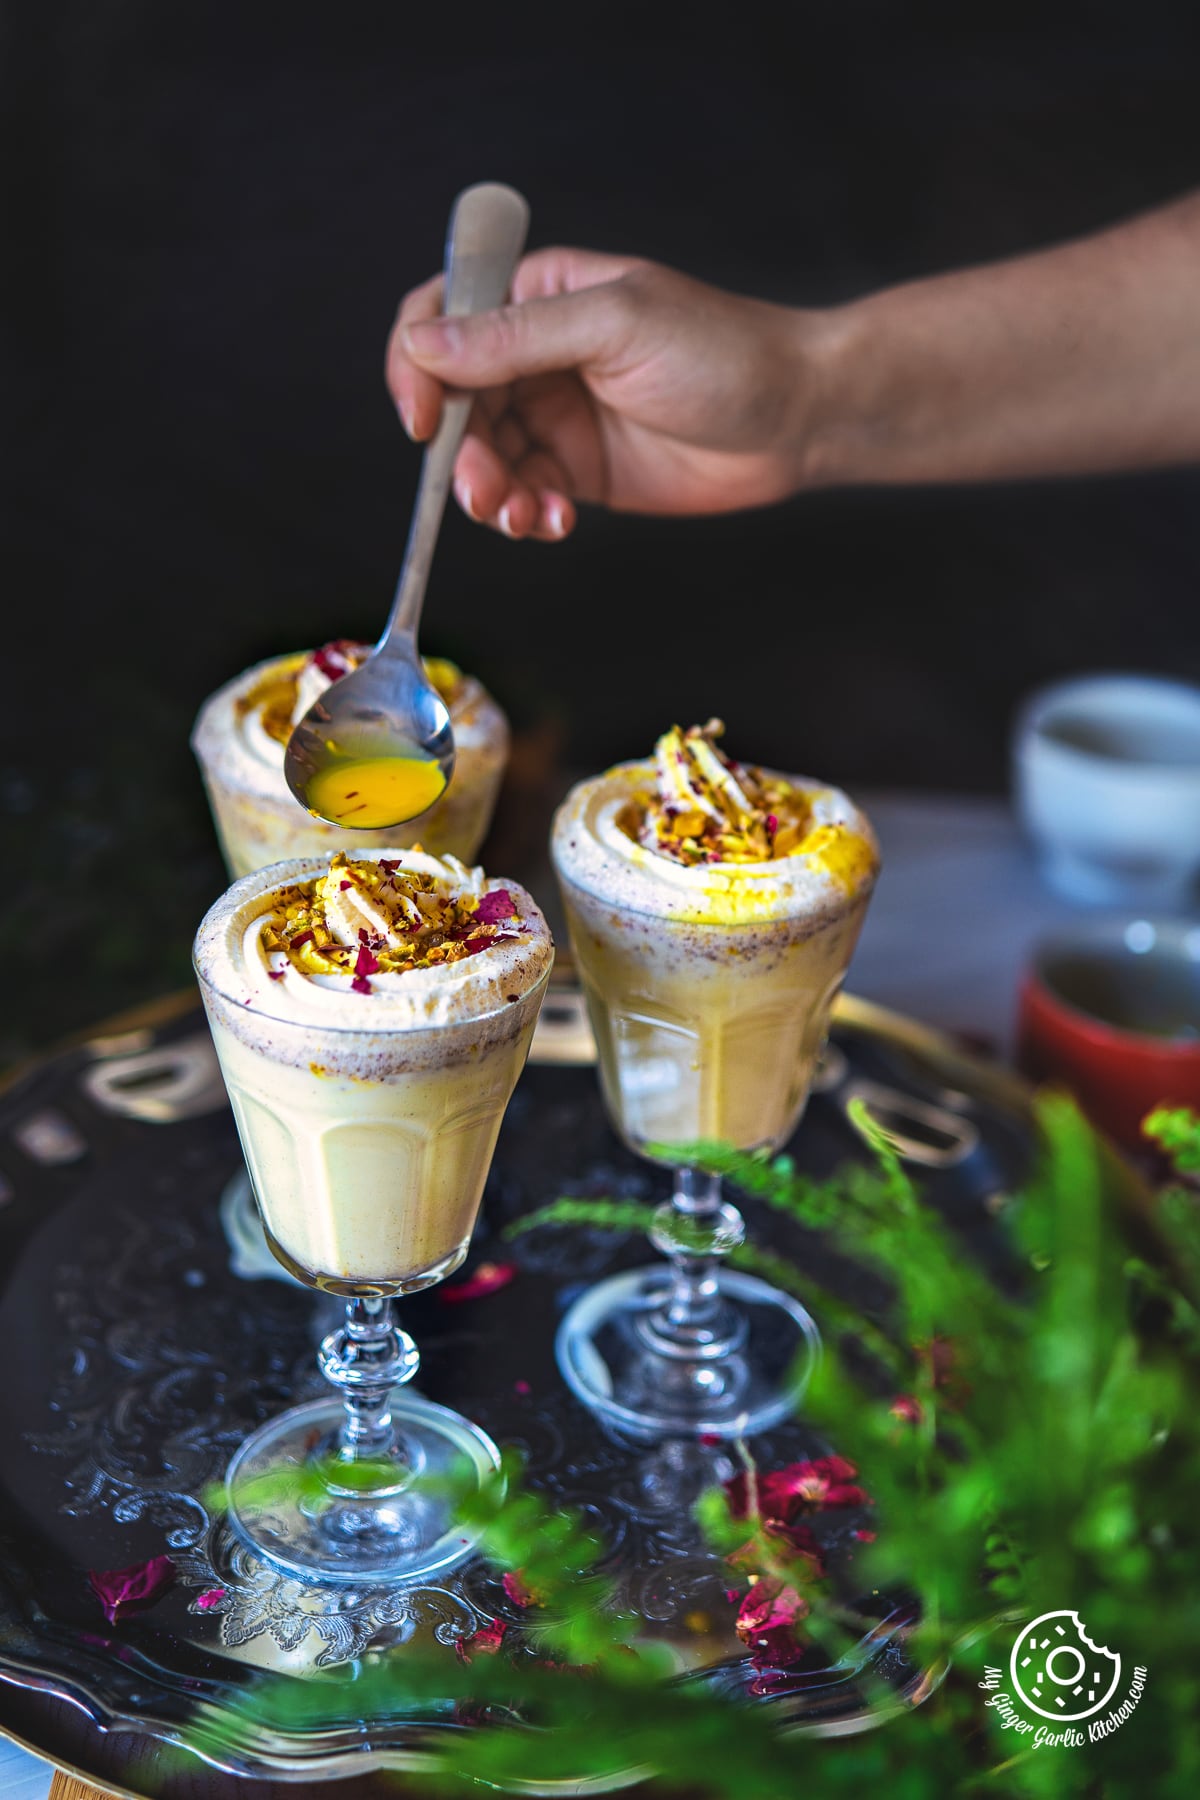 a hand holding a spoon with saffron milk over a glass of thandai frappe with teo more glasses on side